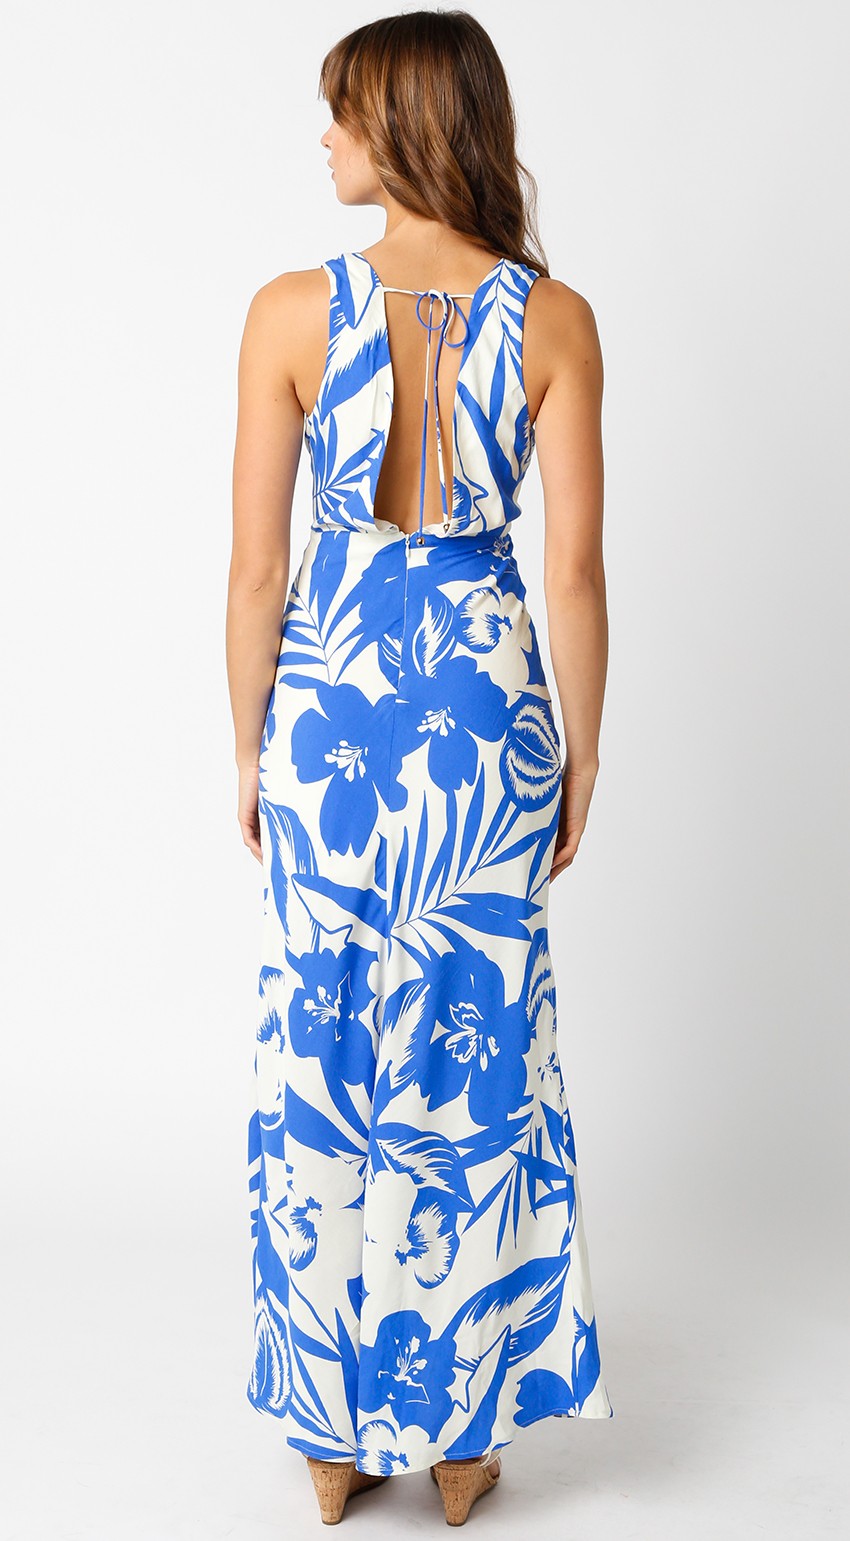 Merideth Cream Blue Maxi Dress by Olivaceous